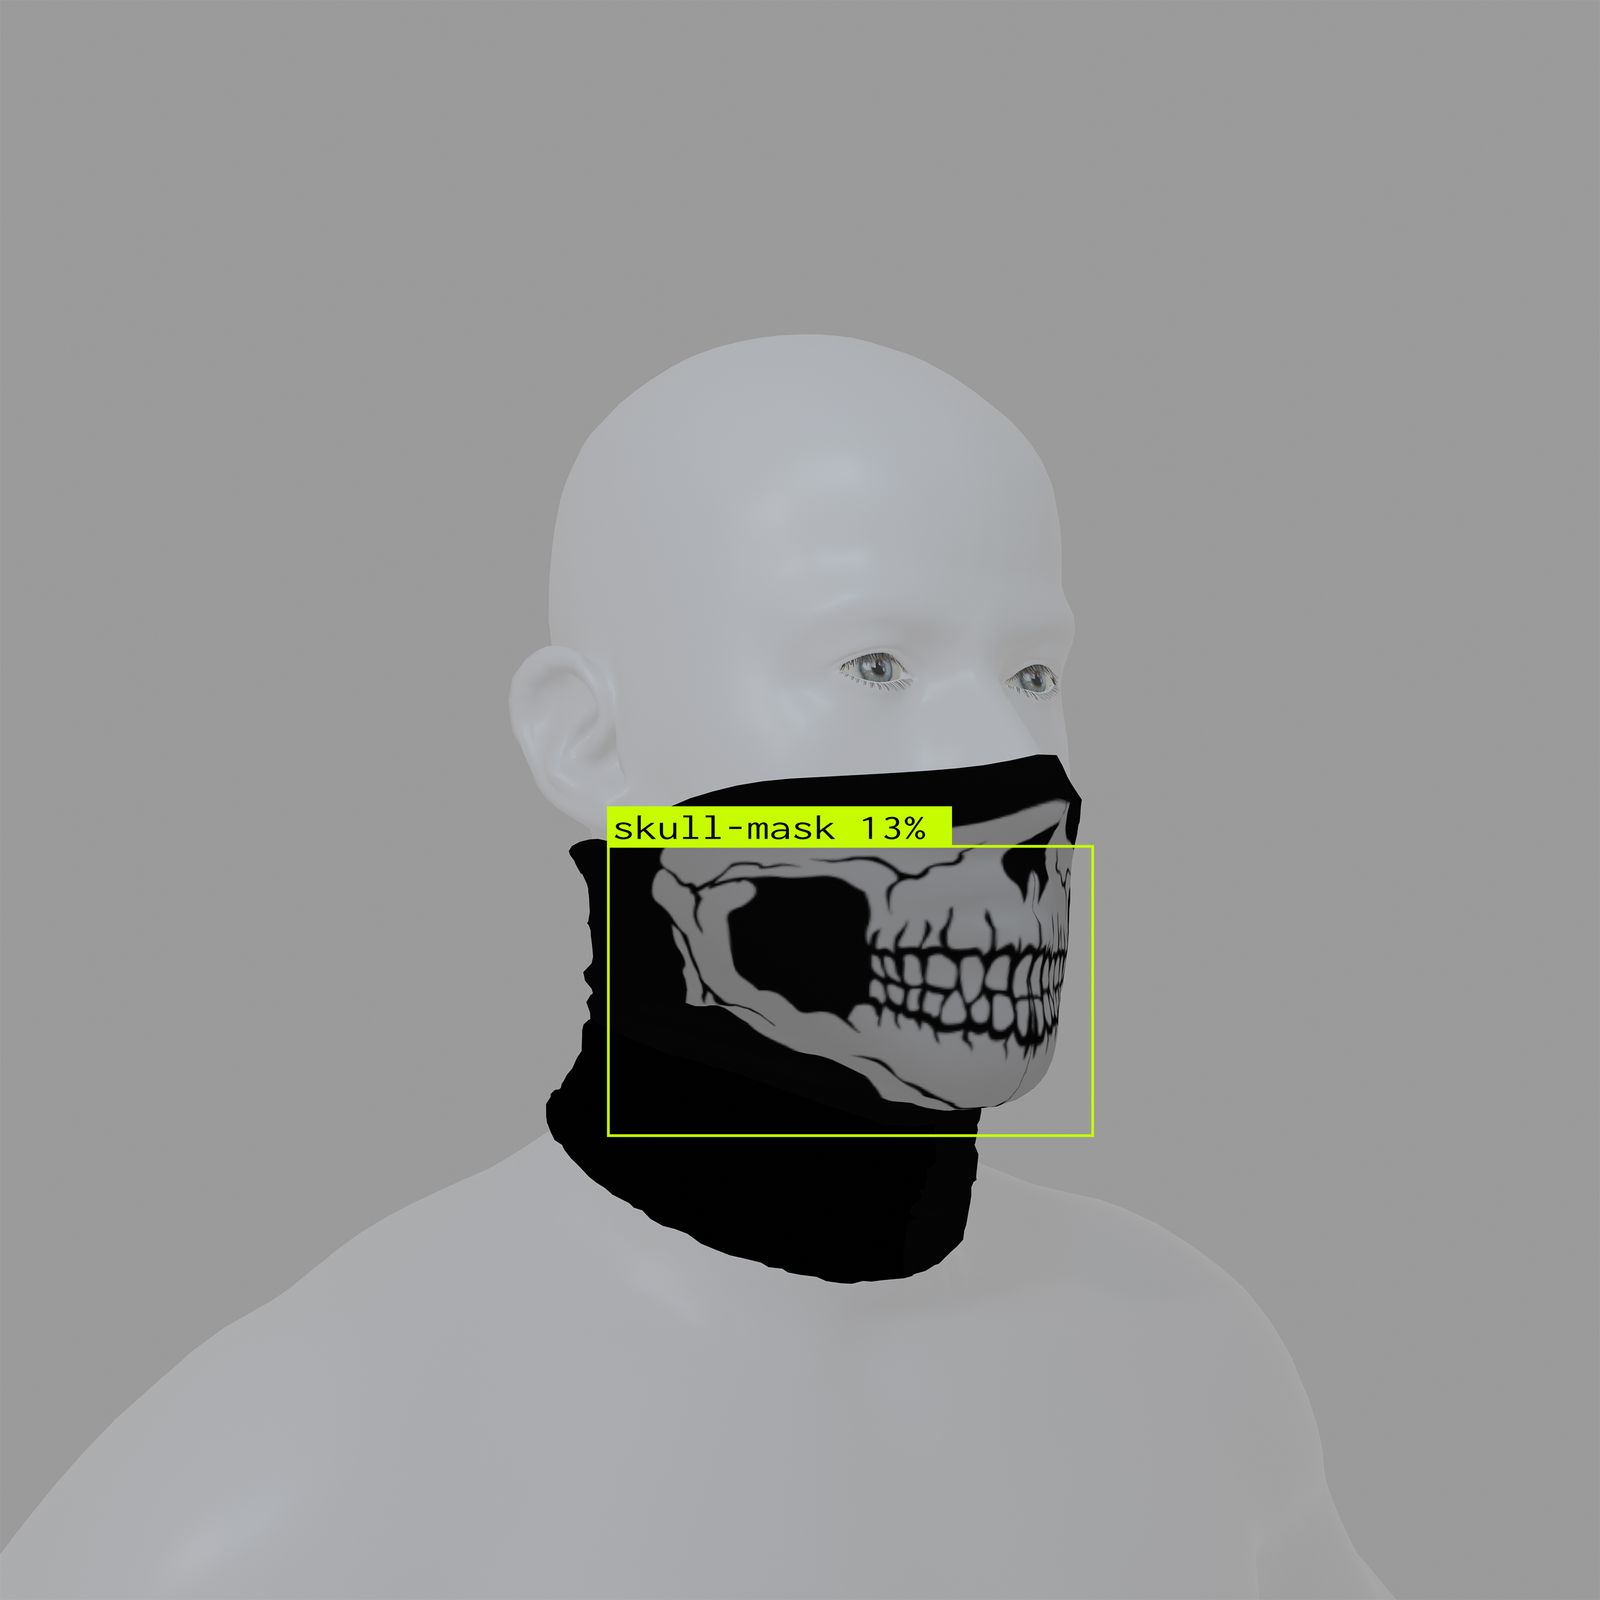 © Marcel Top - Testing of AI recognition of the skull face mask.